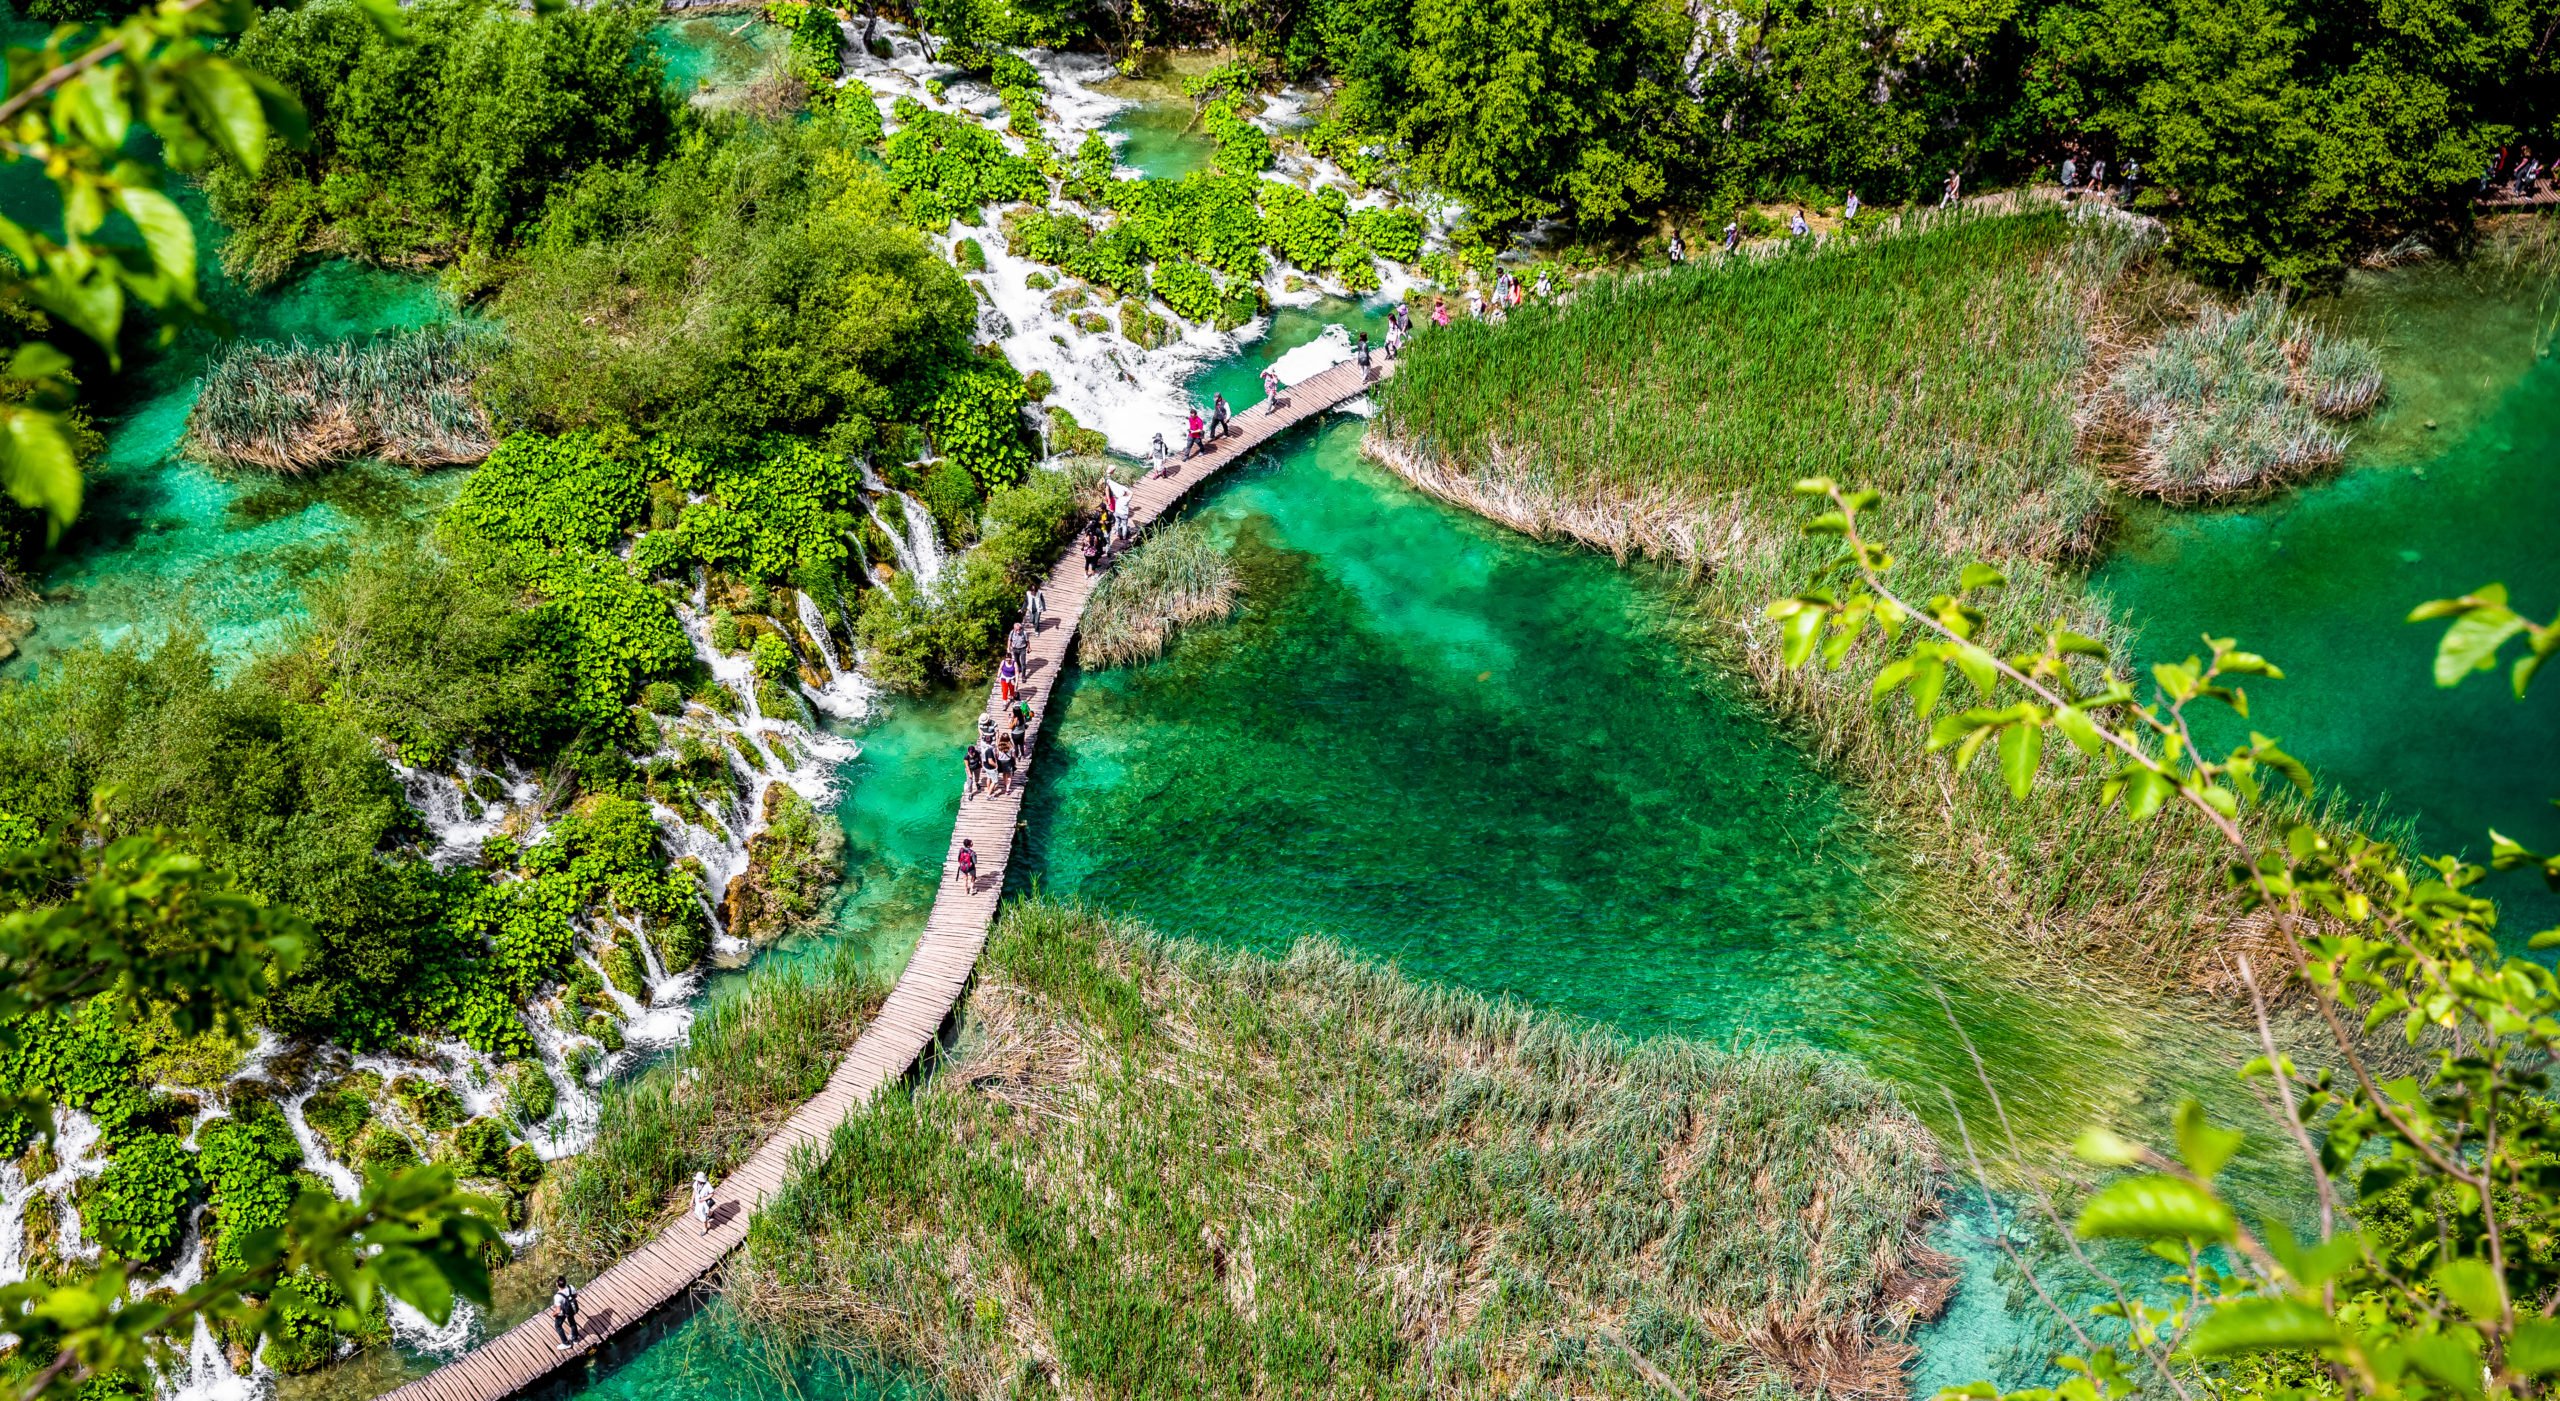 Discover Plitvice National Park On The Best Of Adriatic Sea 11 Day Package Tour (slovenia-croatia-bosnia And Herzegovina-montenegro)